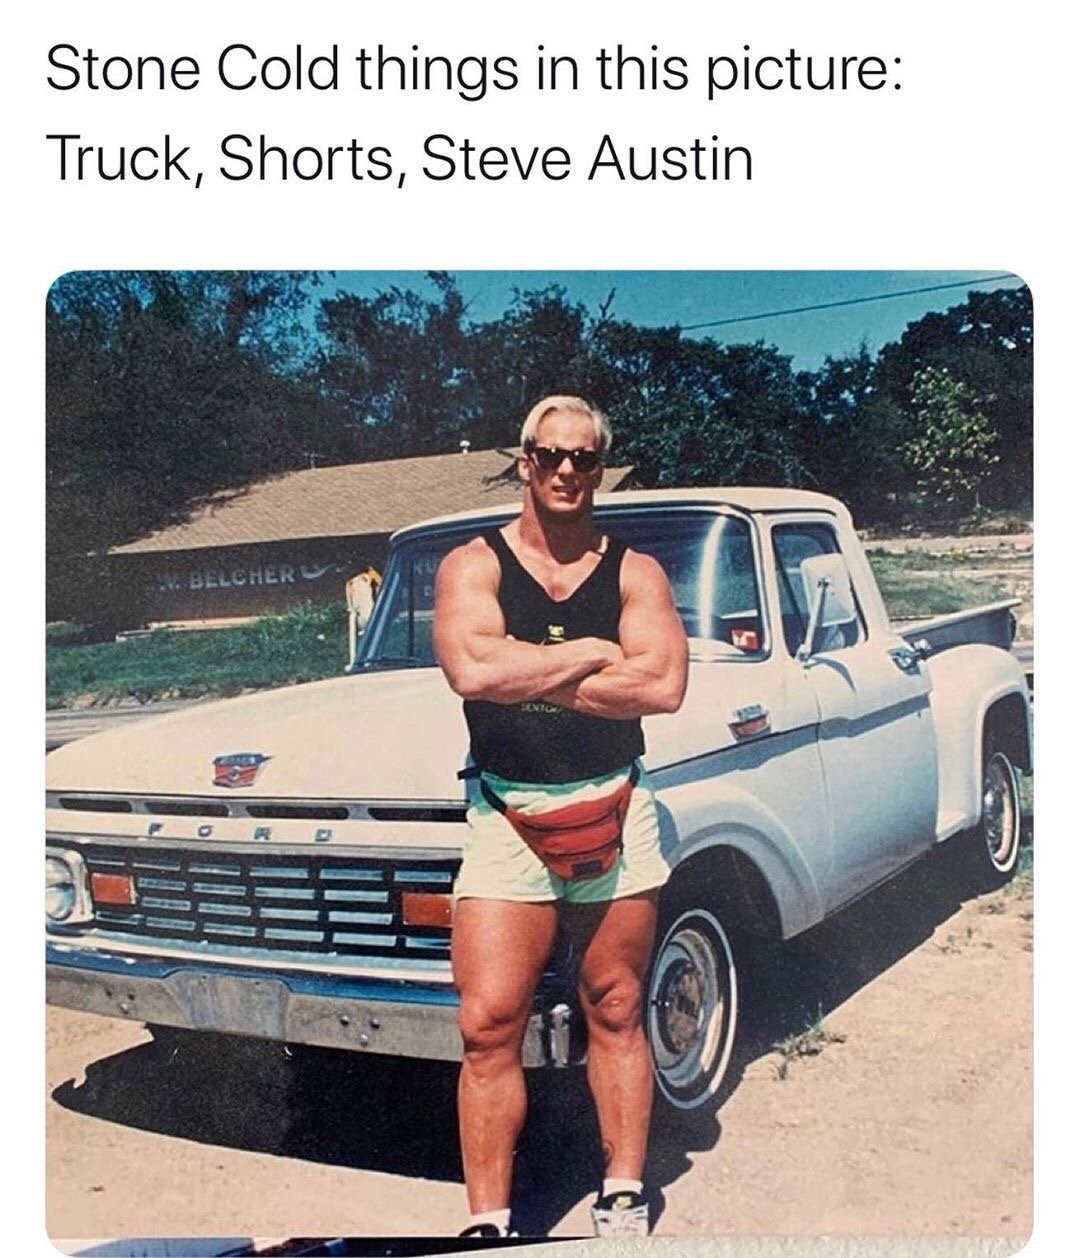 stone cold steve austin fanny pack - Stone Cold things in this picture Truck, Shorts, Steve Austin Belcher Soto